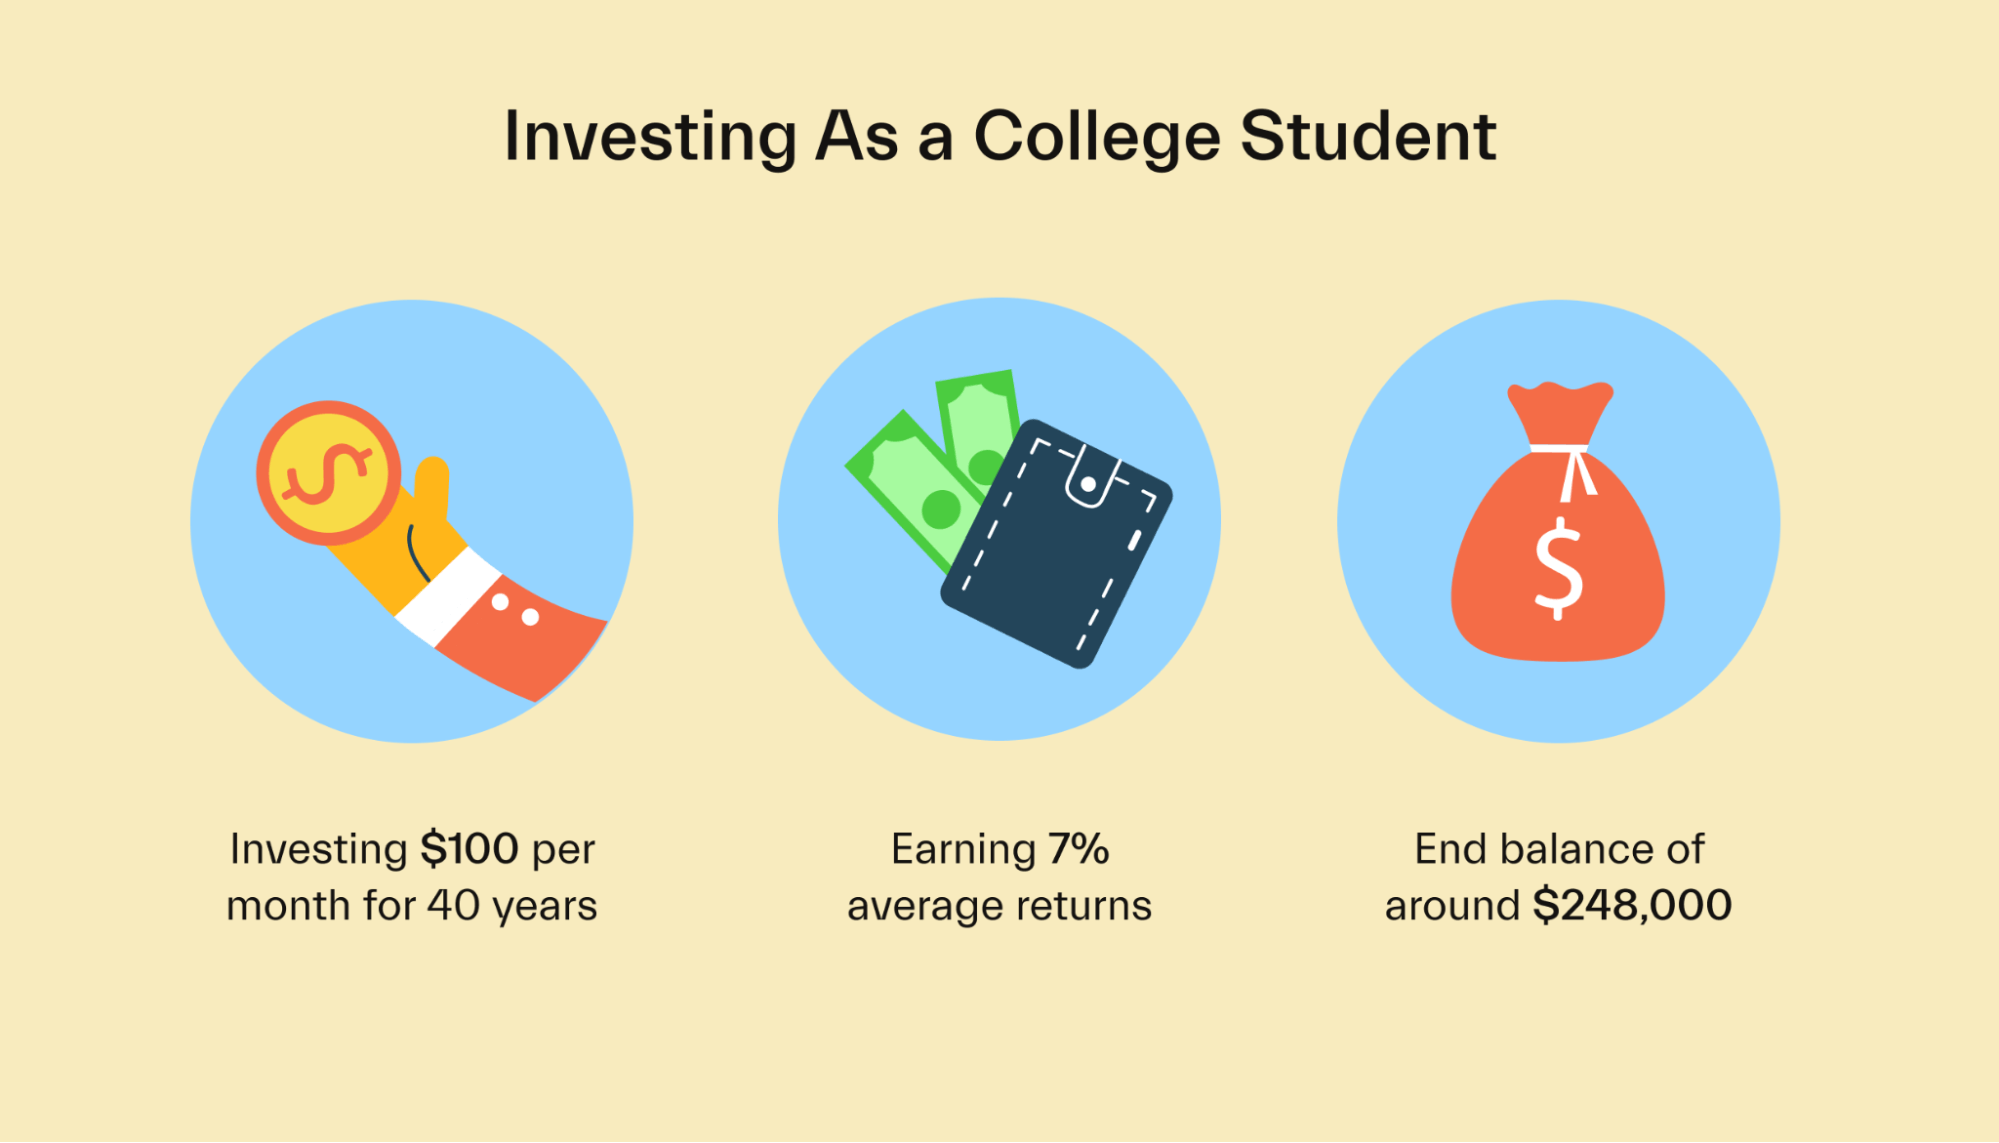 Investing as a college student